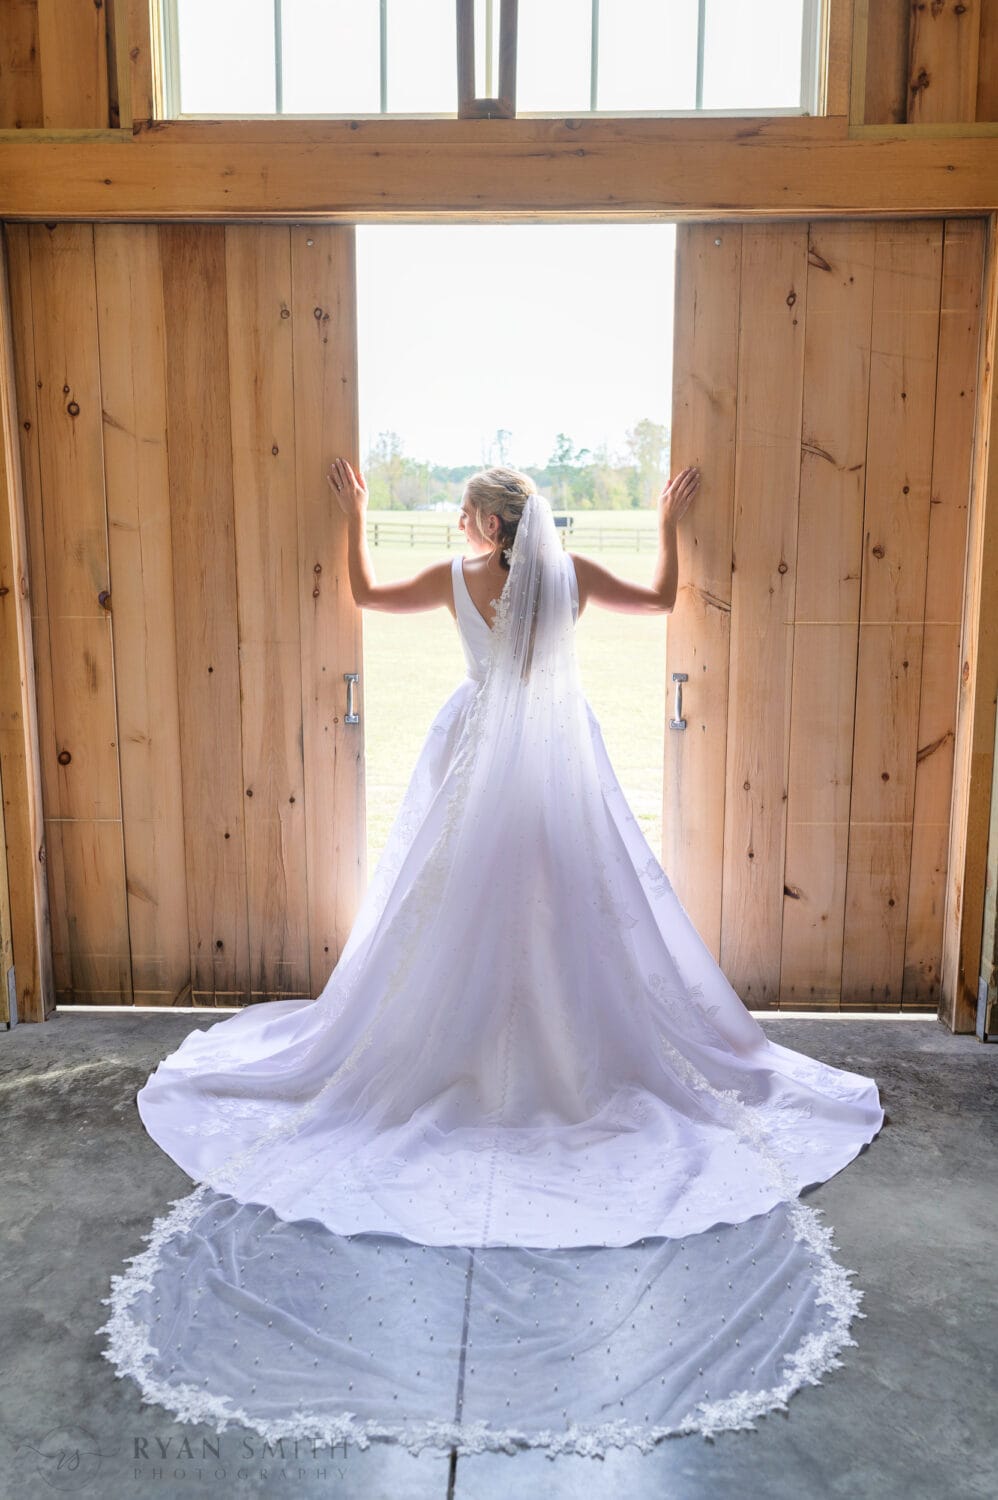 Bride standing in the light coming through the barn doors - The Blessed Barn